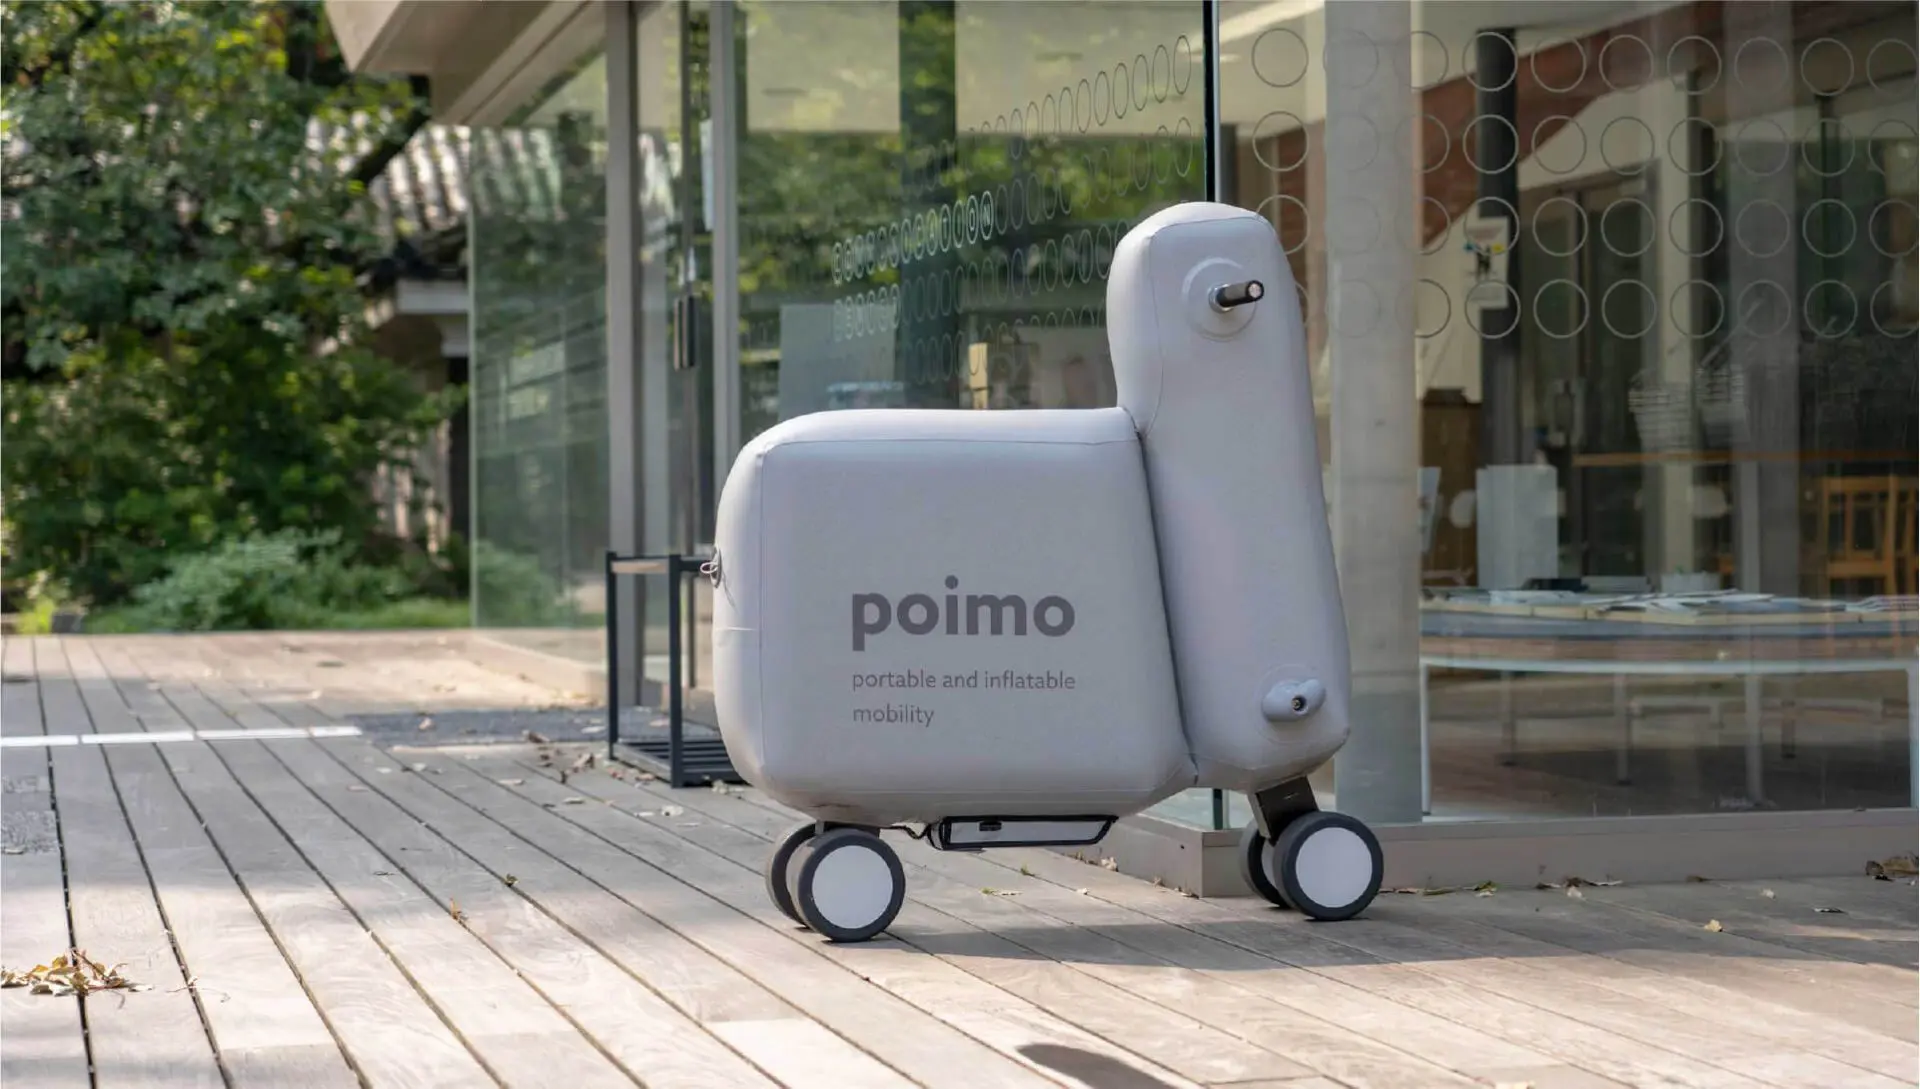 Poimo stands for portable and inflatable mobility